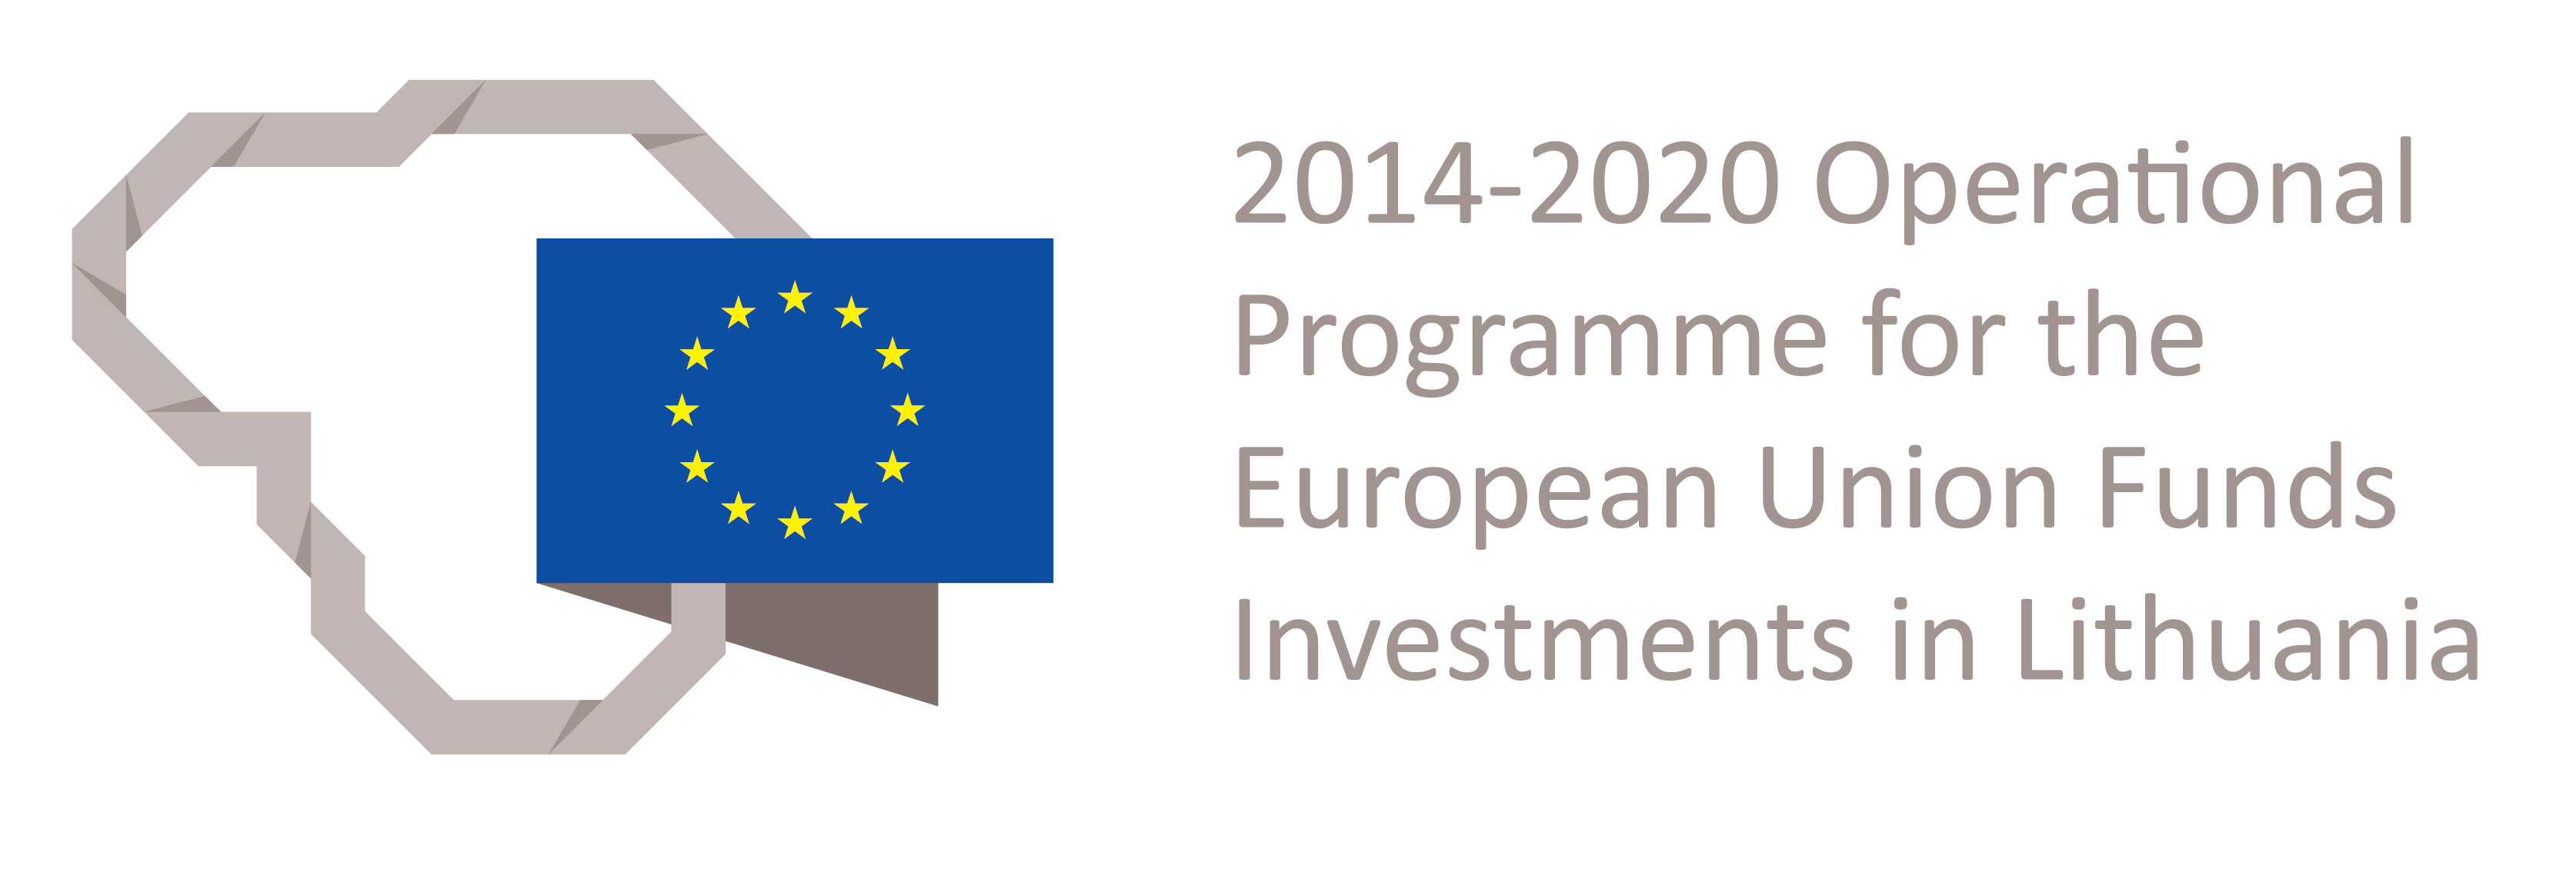 Operational Programme for the European Union Funds Investments